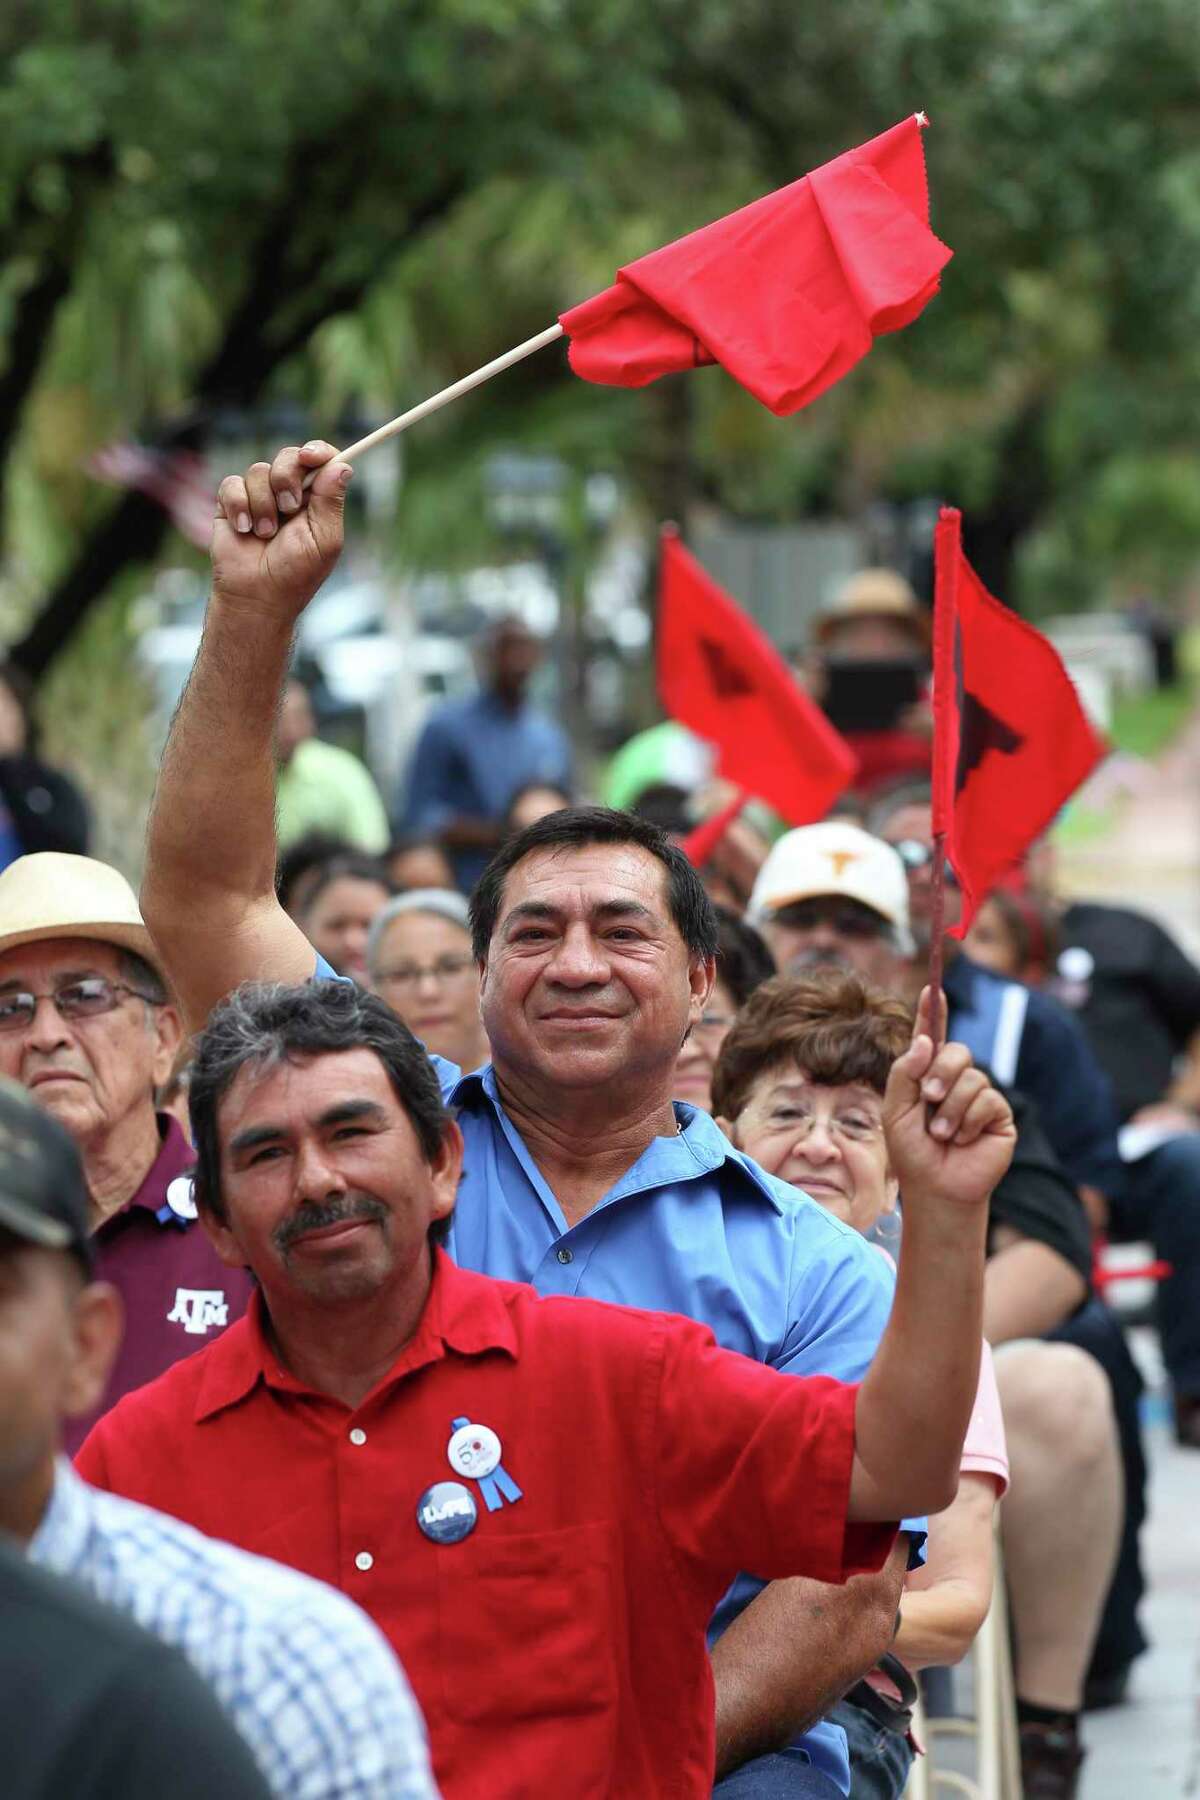 Jose Aldape, 51, foreground in red, of Mercedes, Texas and Adan Arredondo, 54, of Rio Grande City, in blue, wave their flags in support as people gather to commemorate the 50th anniversary of the 1966 Melon Strike in Starr County during a ceremony in Rio Grande City, Wednesday, June 1, 2016. The strike was started in an effort to raise the minimum wage of farmworkers from 25 cents an hour to $1.25.